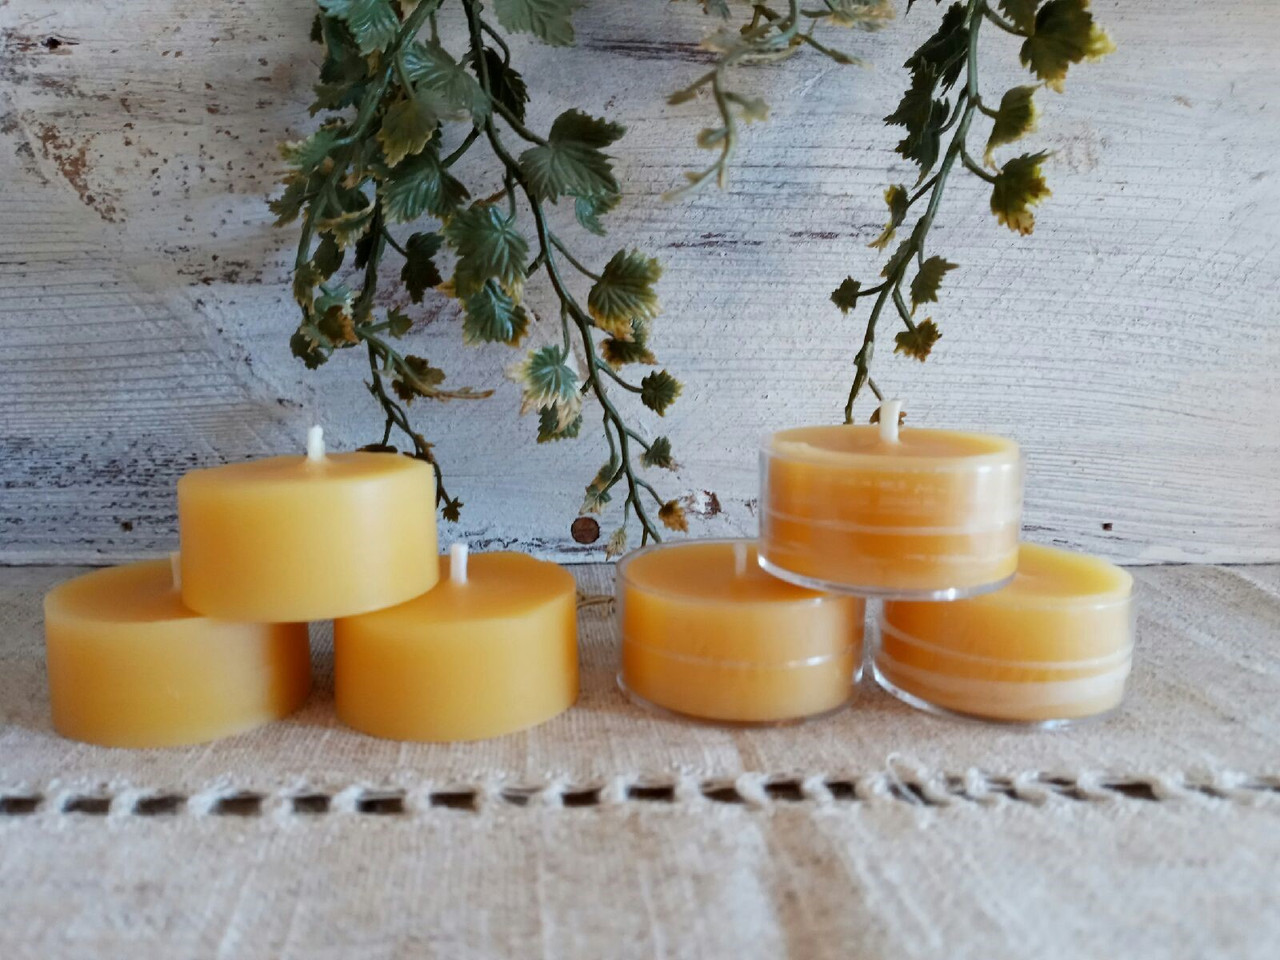 White Tealight Beeswax Candles BULK 100% Natural Handcrafted USA / 6 / 12 /  25 / 50 / 75 / 100 / 200 / Tea Lights Wedding Event Party Honey 